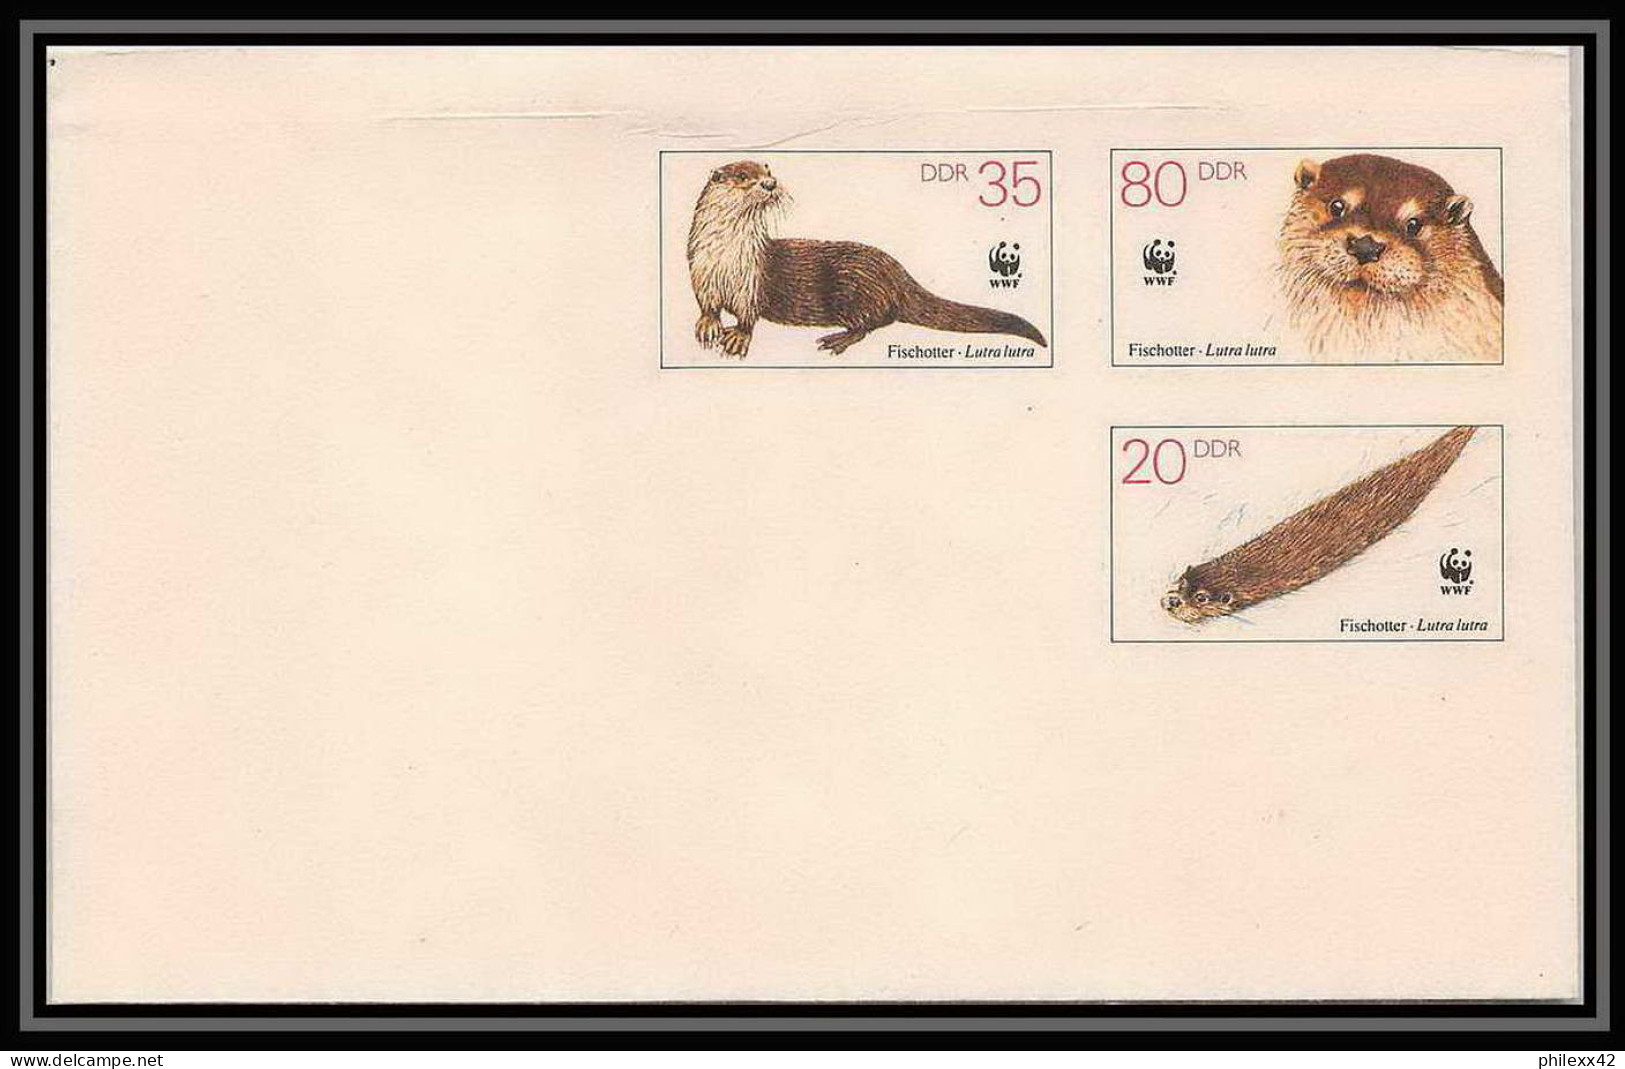 2167/ Allemagne (germany DDR) Lot De 3 Entiers Stationery Enveloppe (cover) Wwwf Animaux Animals 1987 - Covers - Mint